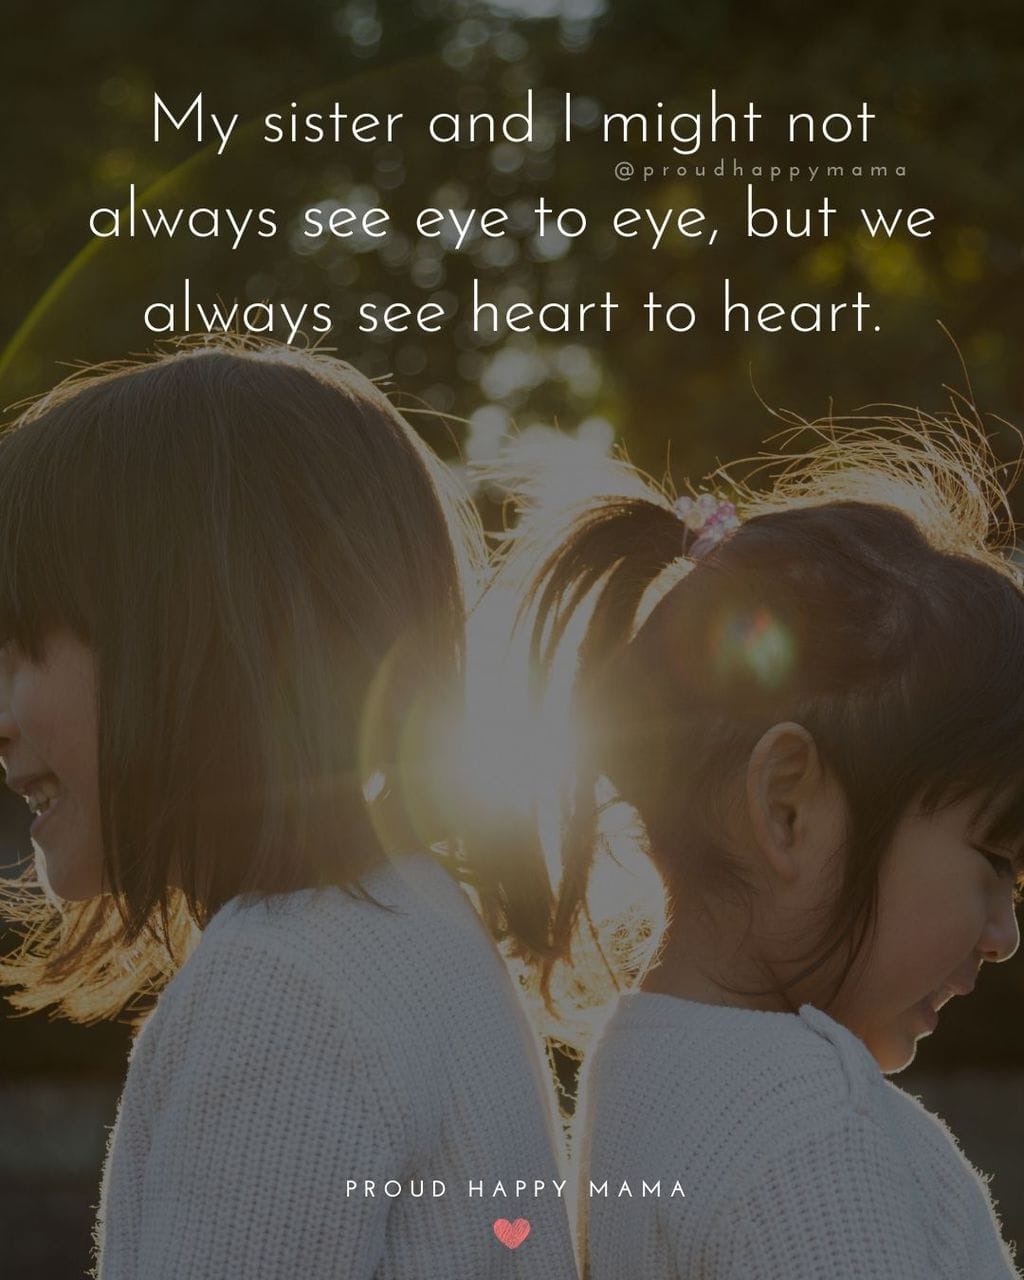 Sister Quotes - My sister and I might not always see eye to eye, but we always see heart to heart.